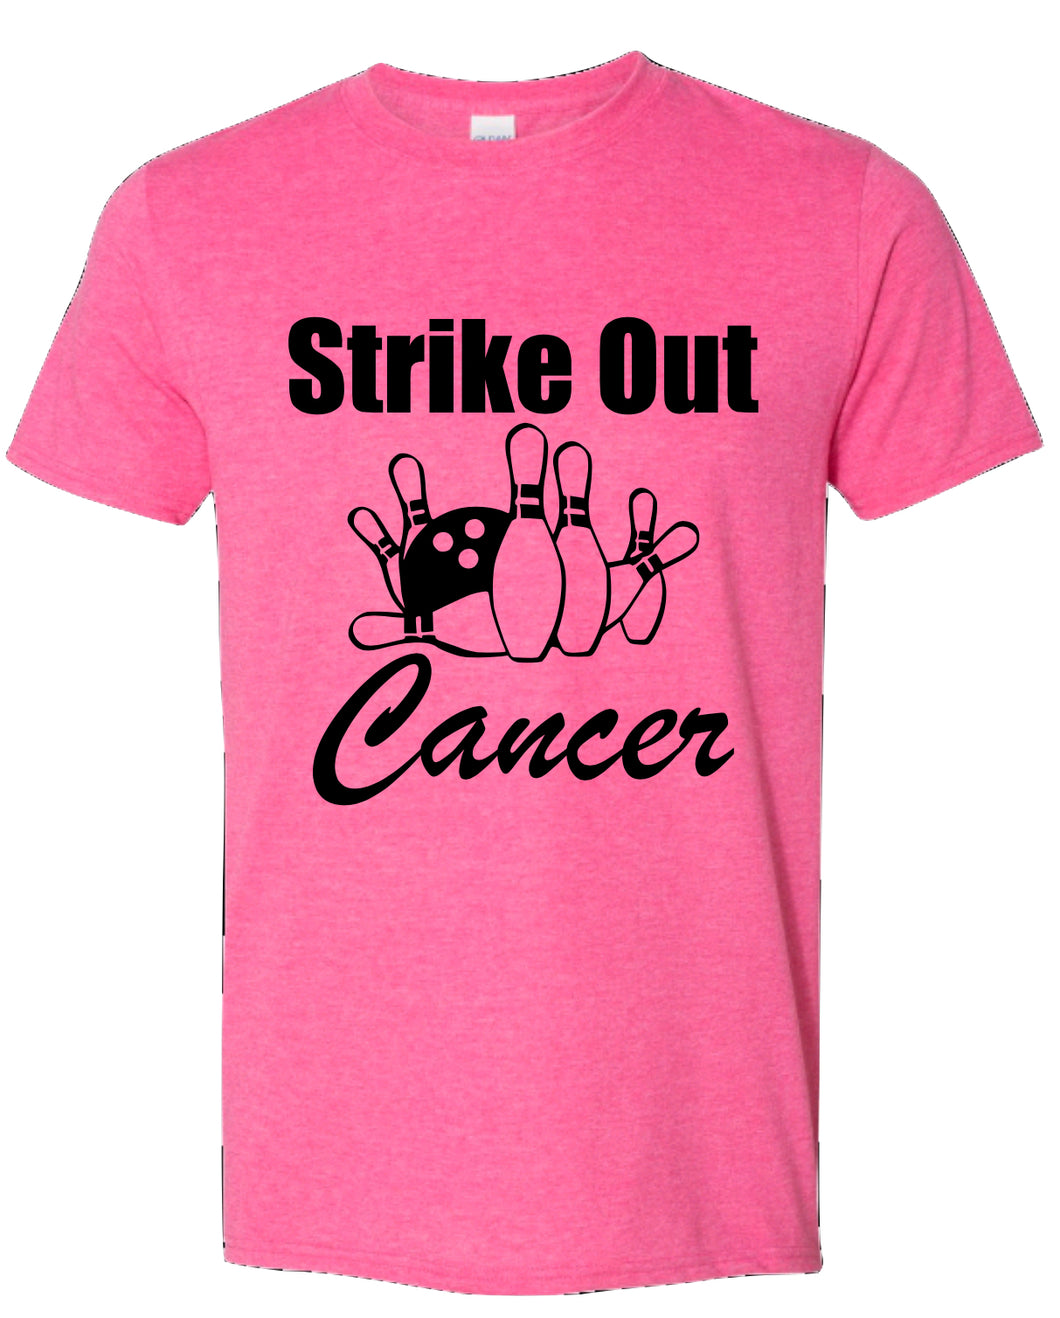 Strike Out Cancer Tee